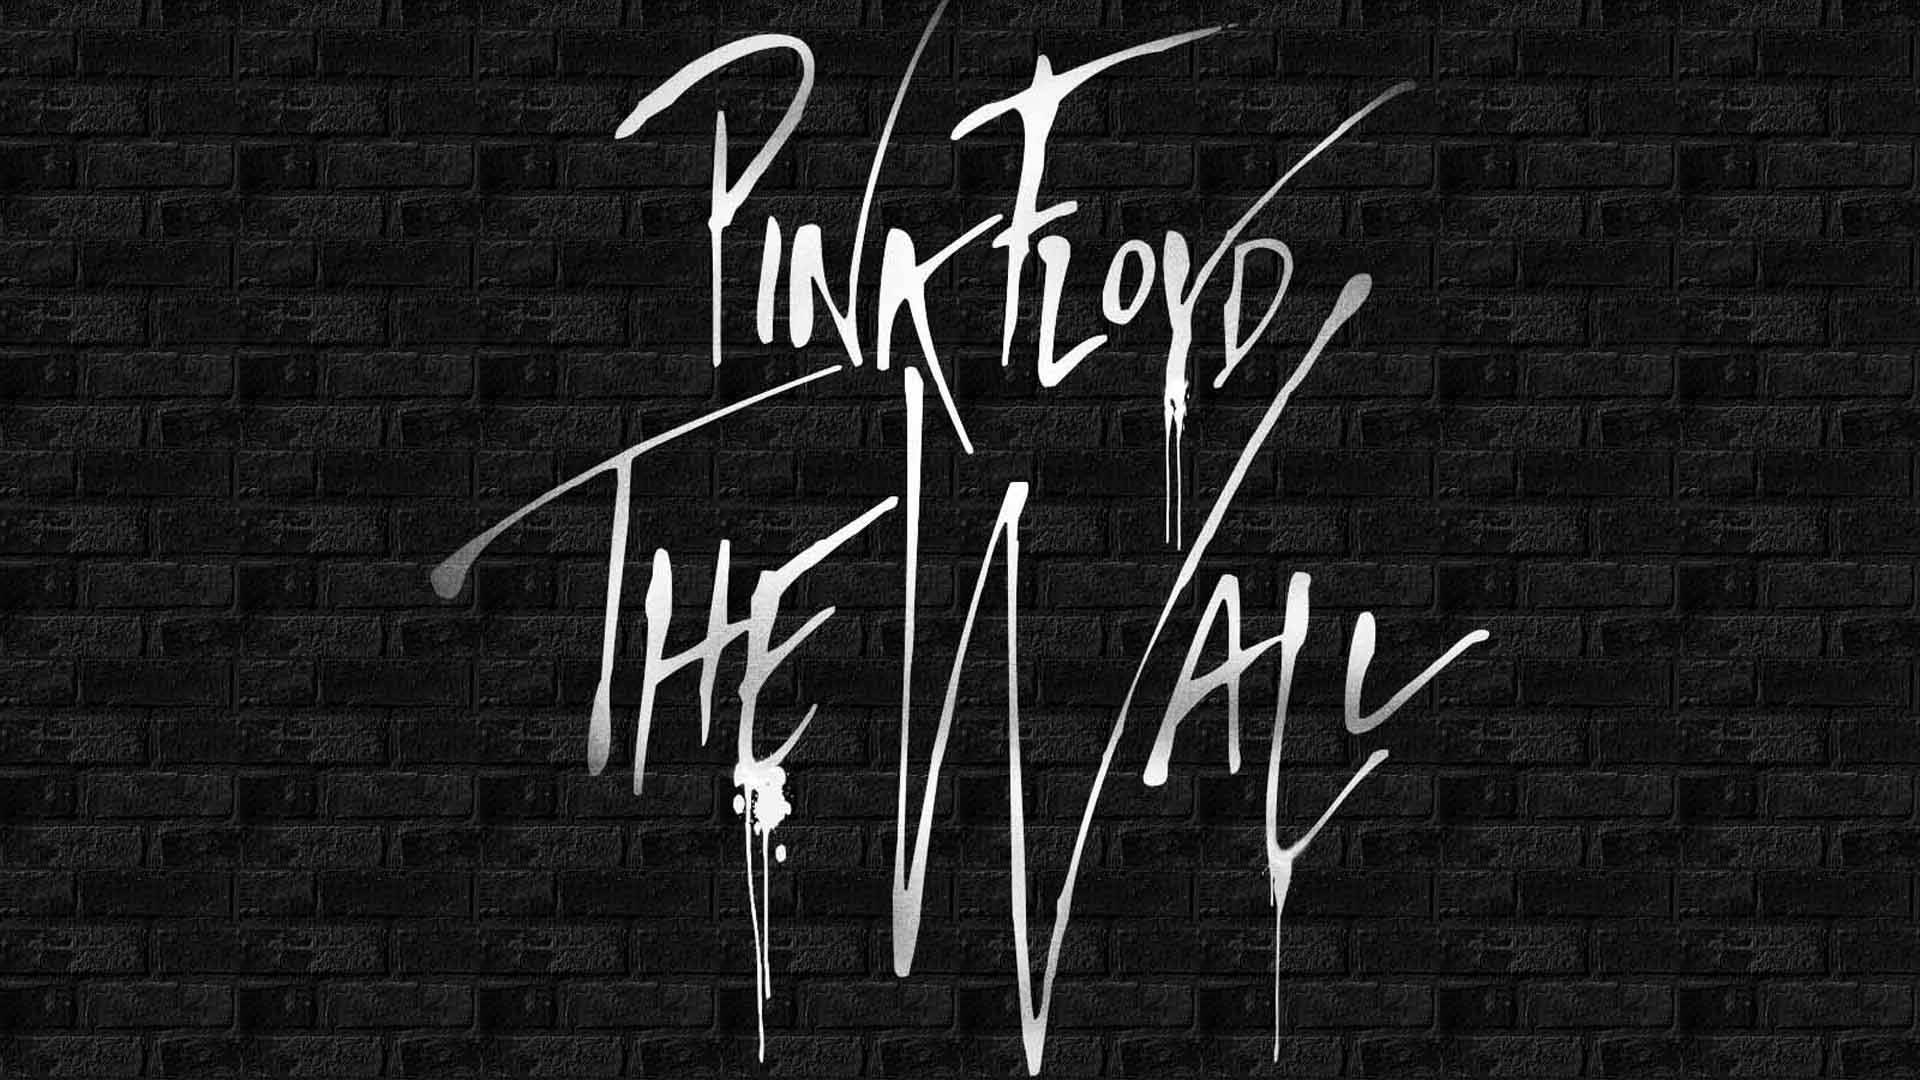 Pink Floyd “The Wall” Poster Wallpaper